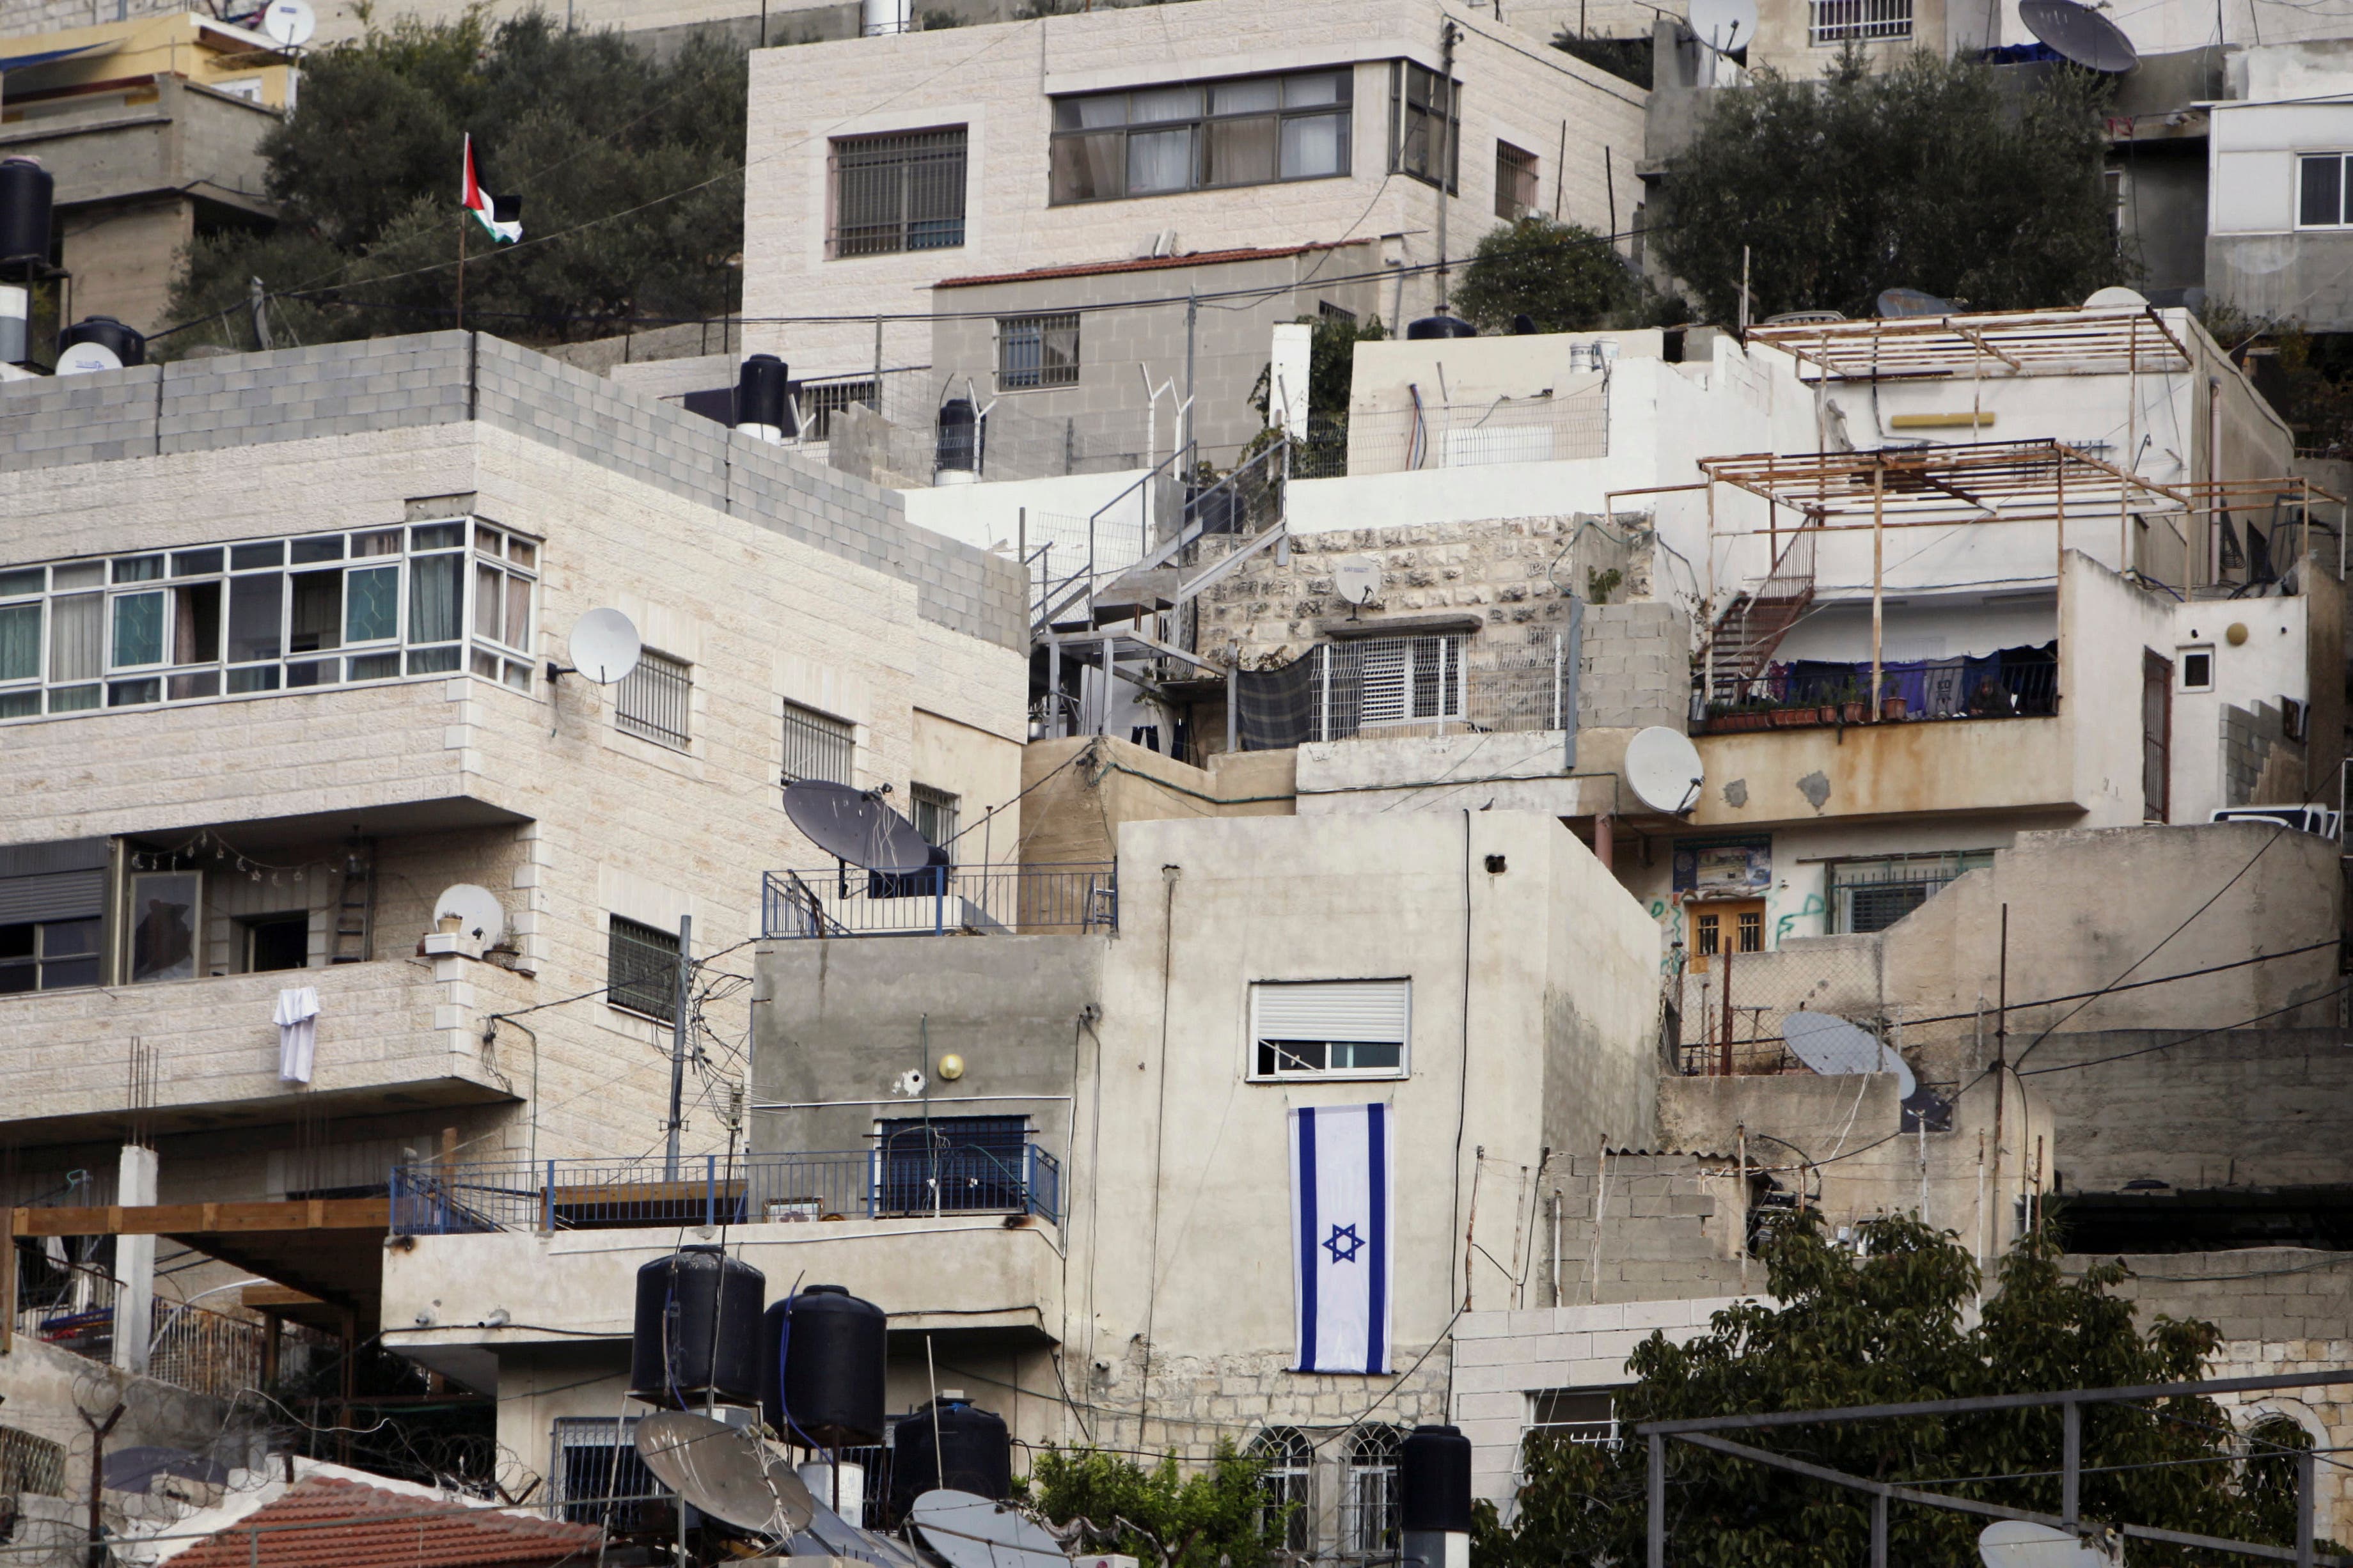  In this Monday, Oct. 19, 2015, photo, an Israeli flag hangs on the wall of a building that was taken over by Israeli settlers after Palestinian families were evicted in the Silwan neighborhood of east Jerusalem. (AP)